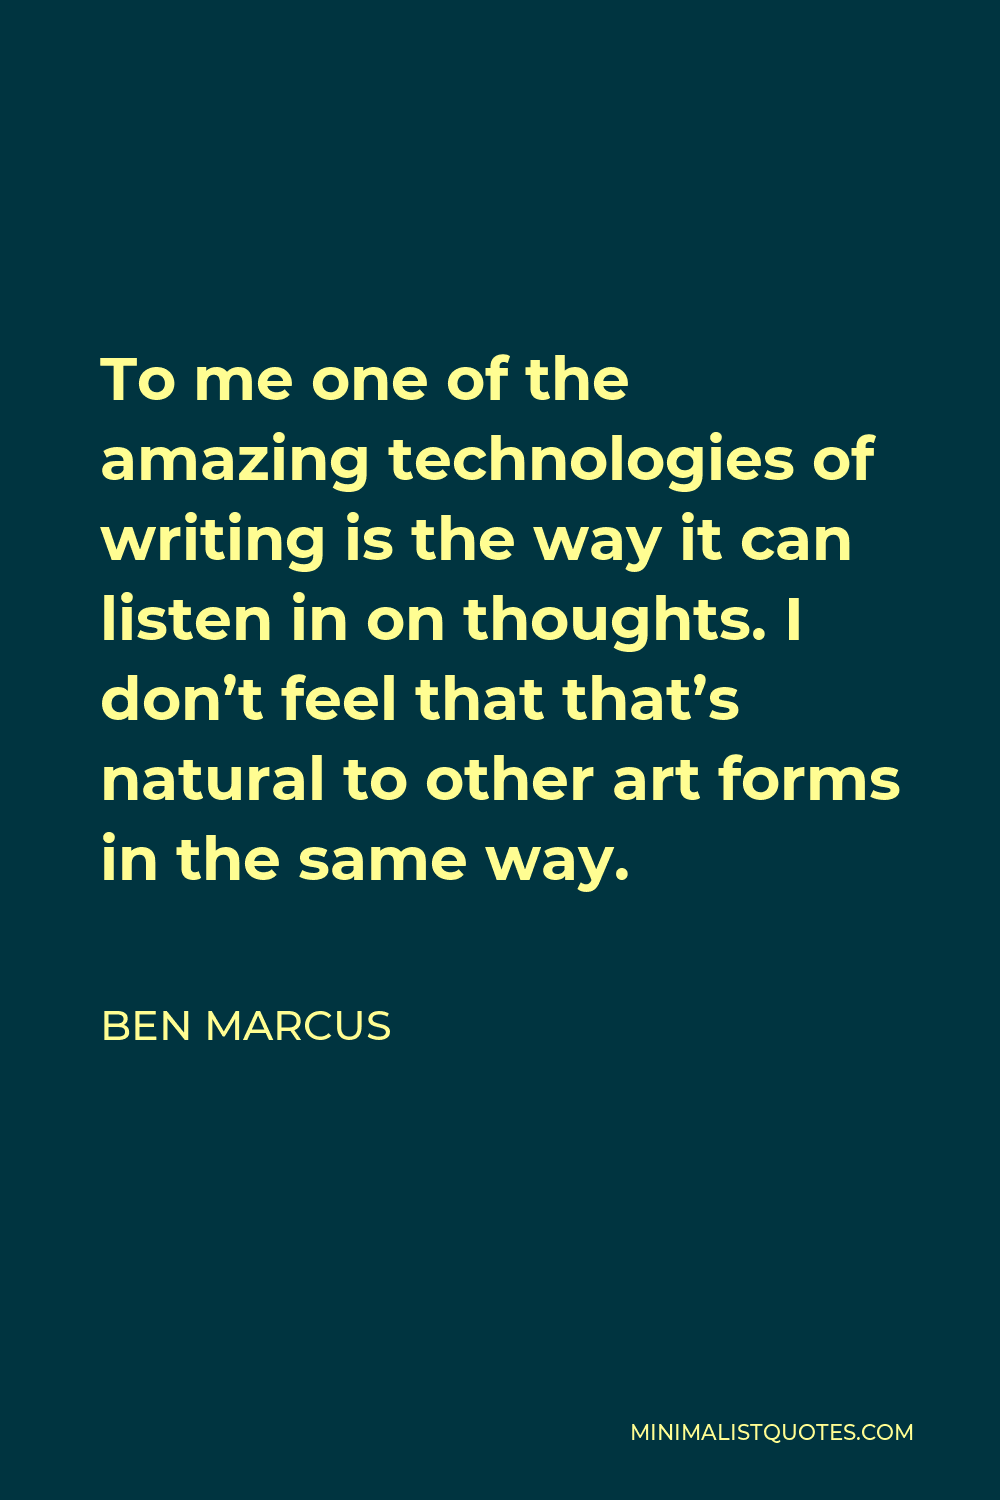 Ben Marcus Quote - To me one of the amazing technologies of writing is the way it can listen in on thoughts. I don’t feel that that’s natural to other art forms in the same way.